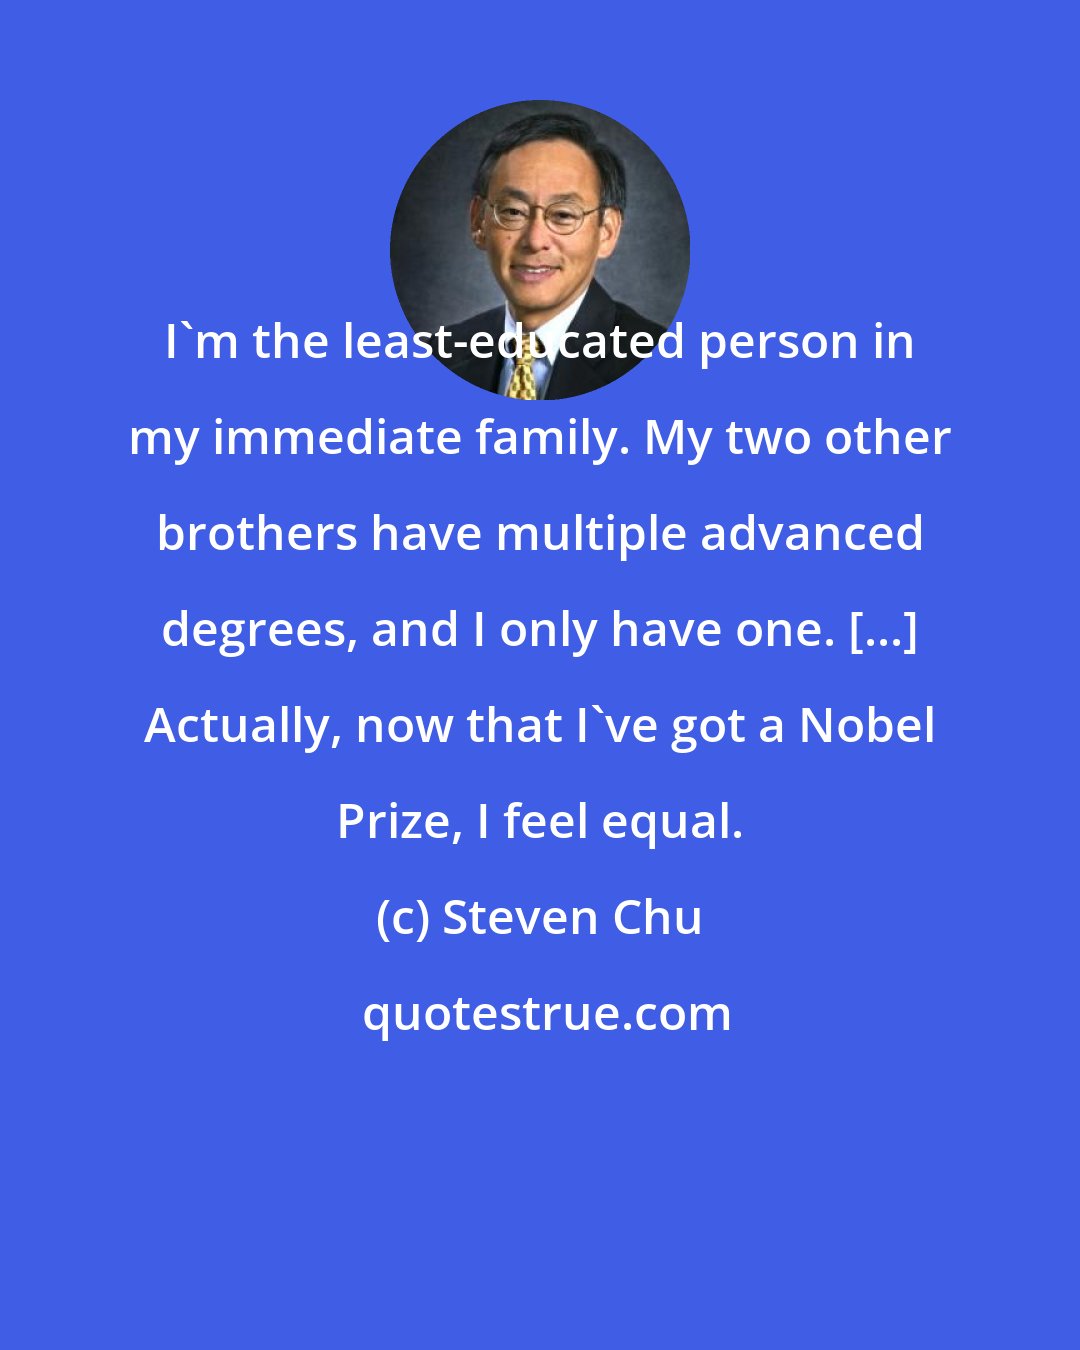 Steven Chu: I'm the least-educated person in my immediate family. My two other brothers have multiple advanced degrees, and I only have one. [...] Actually, now that I've got a Nobel Prize, I feel equal.